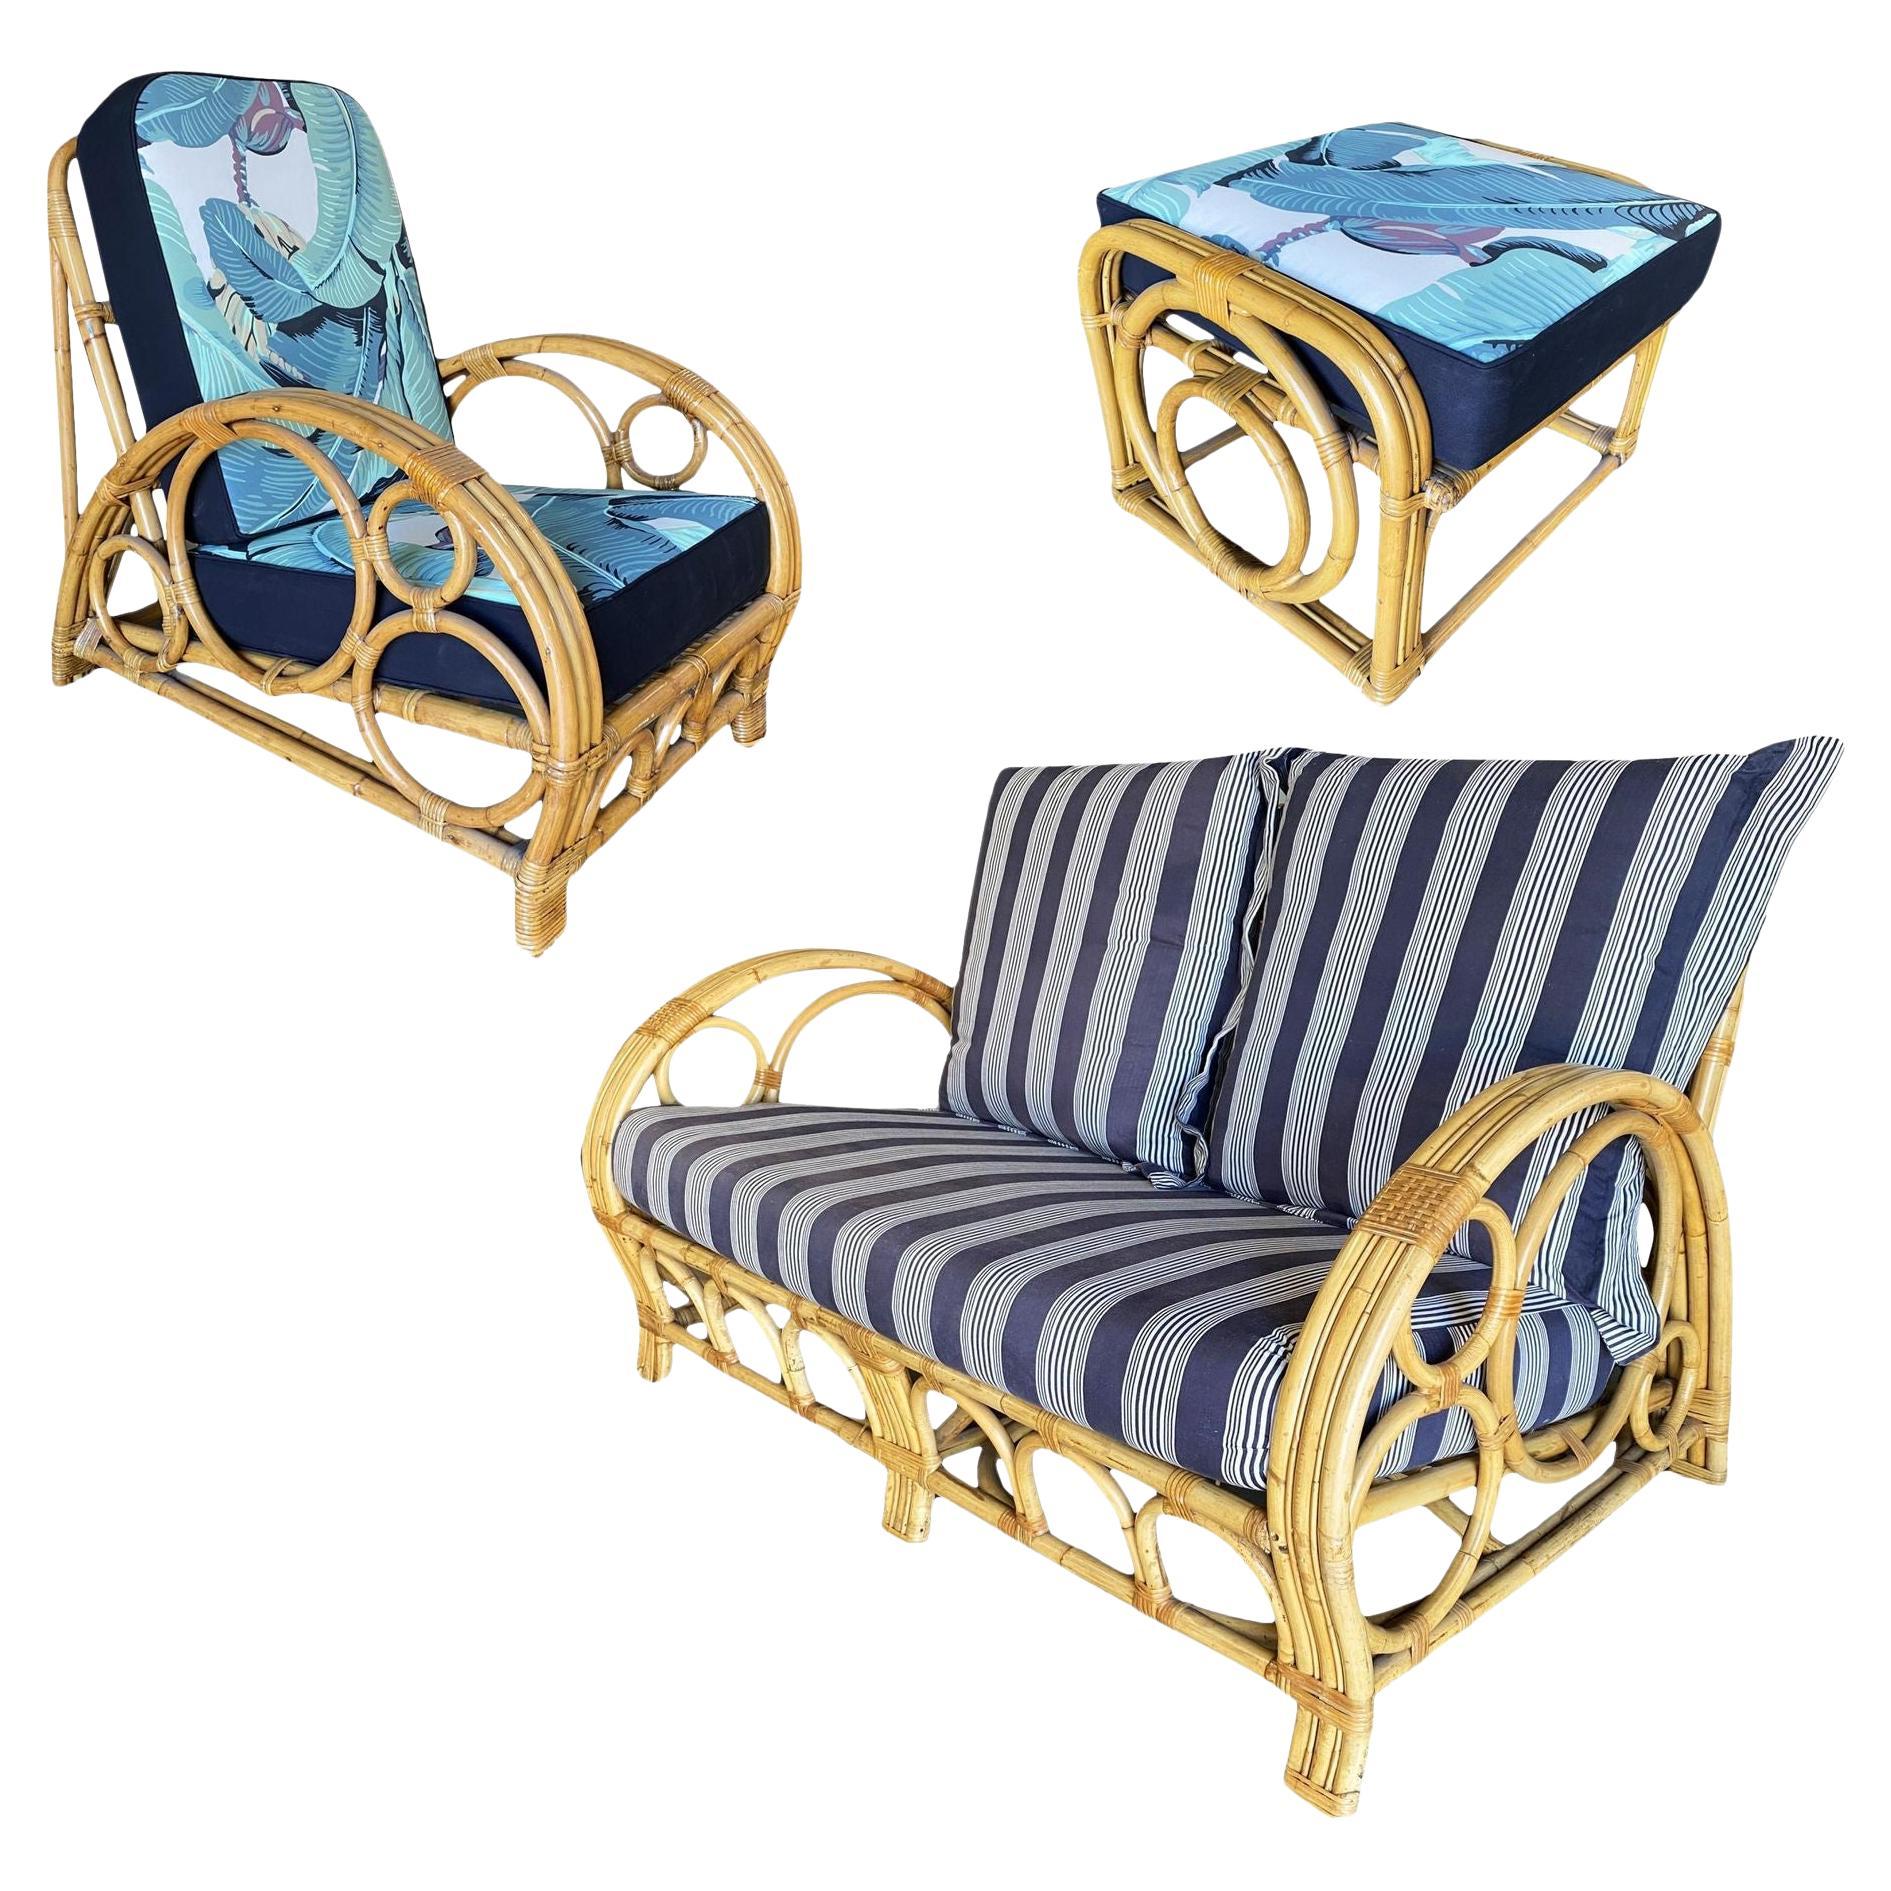 Restored 3-Strand "Circles and Speed" Rattan Settee, Lounge Chair & Ottoman For Sale